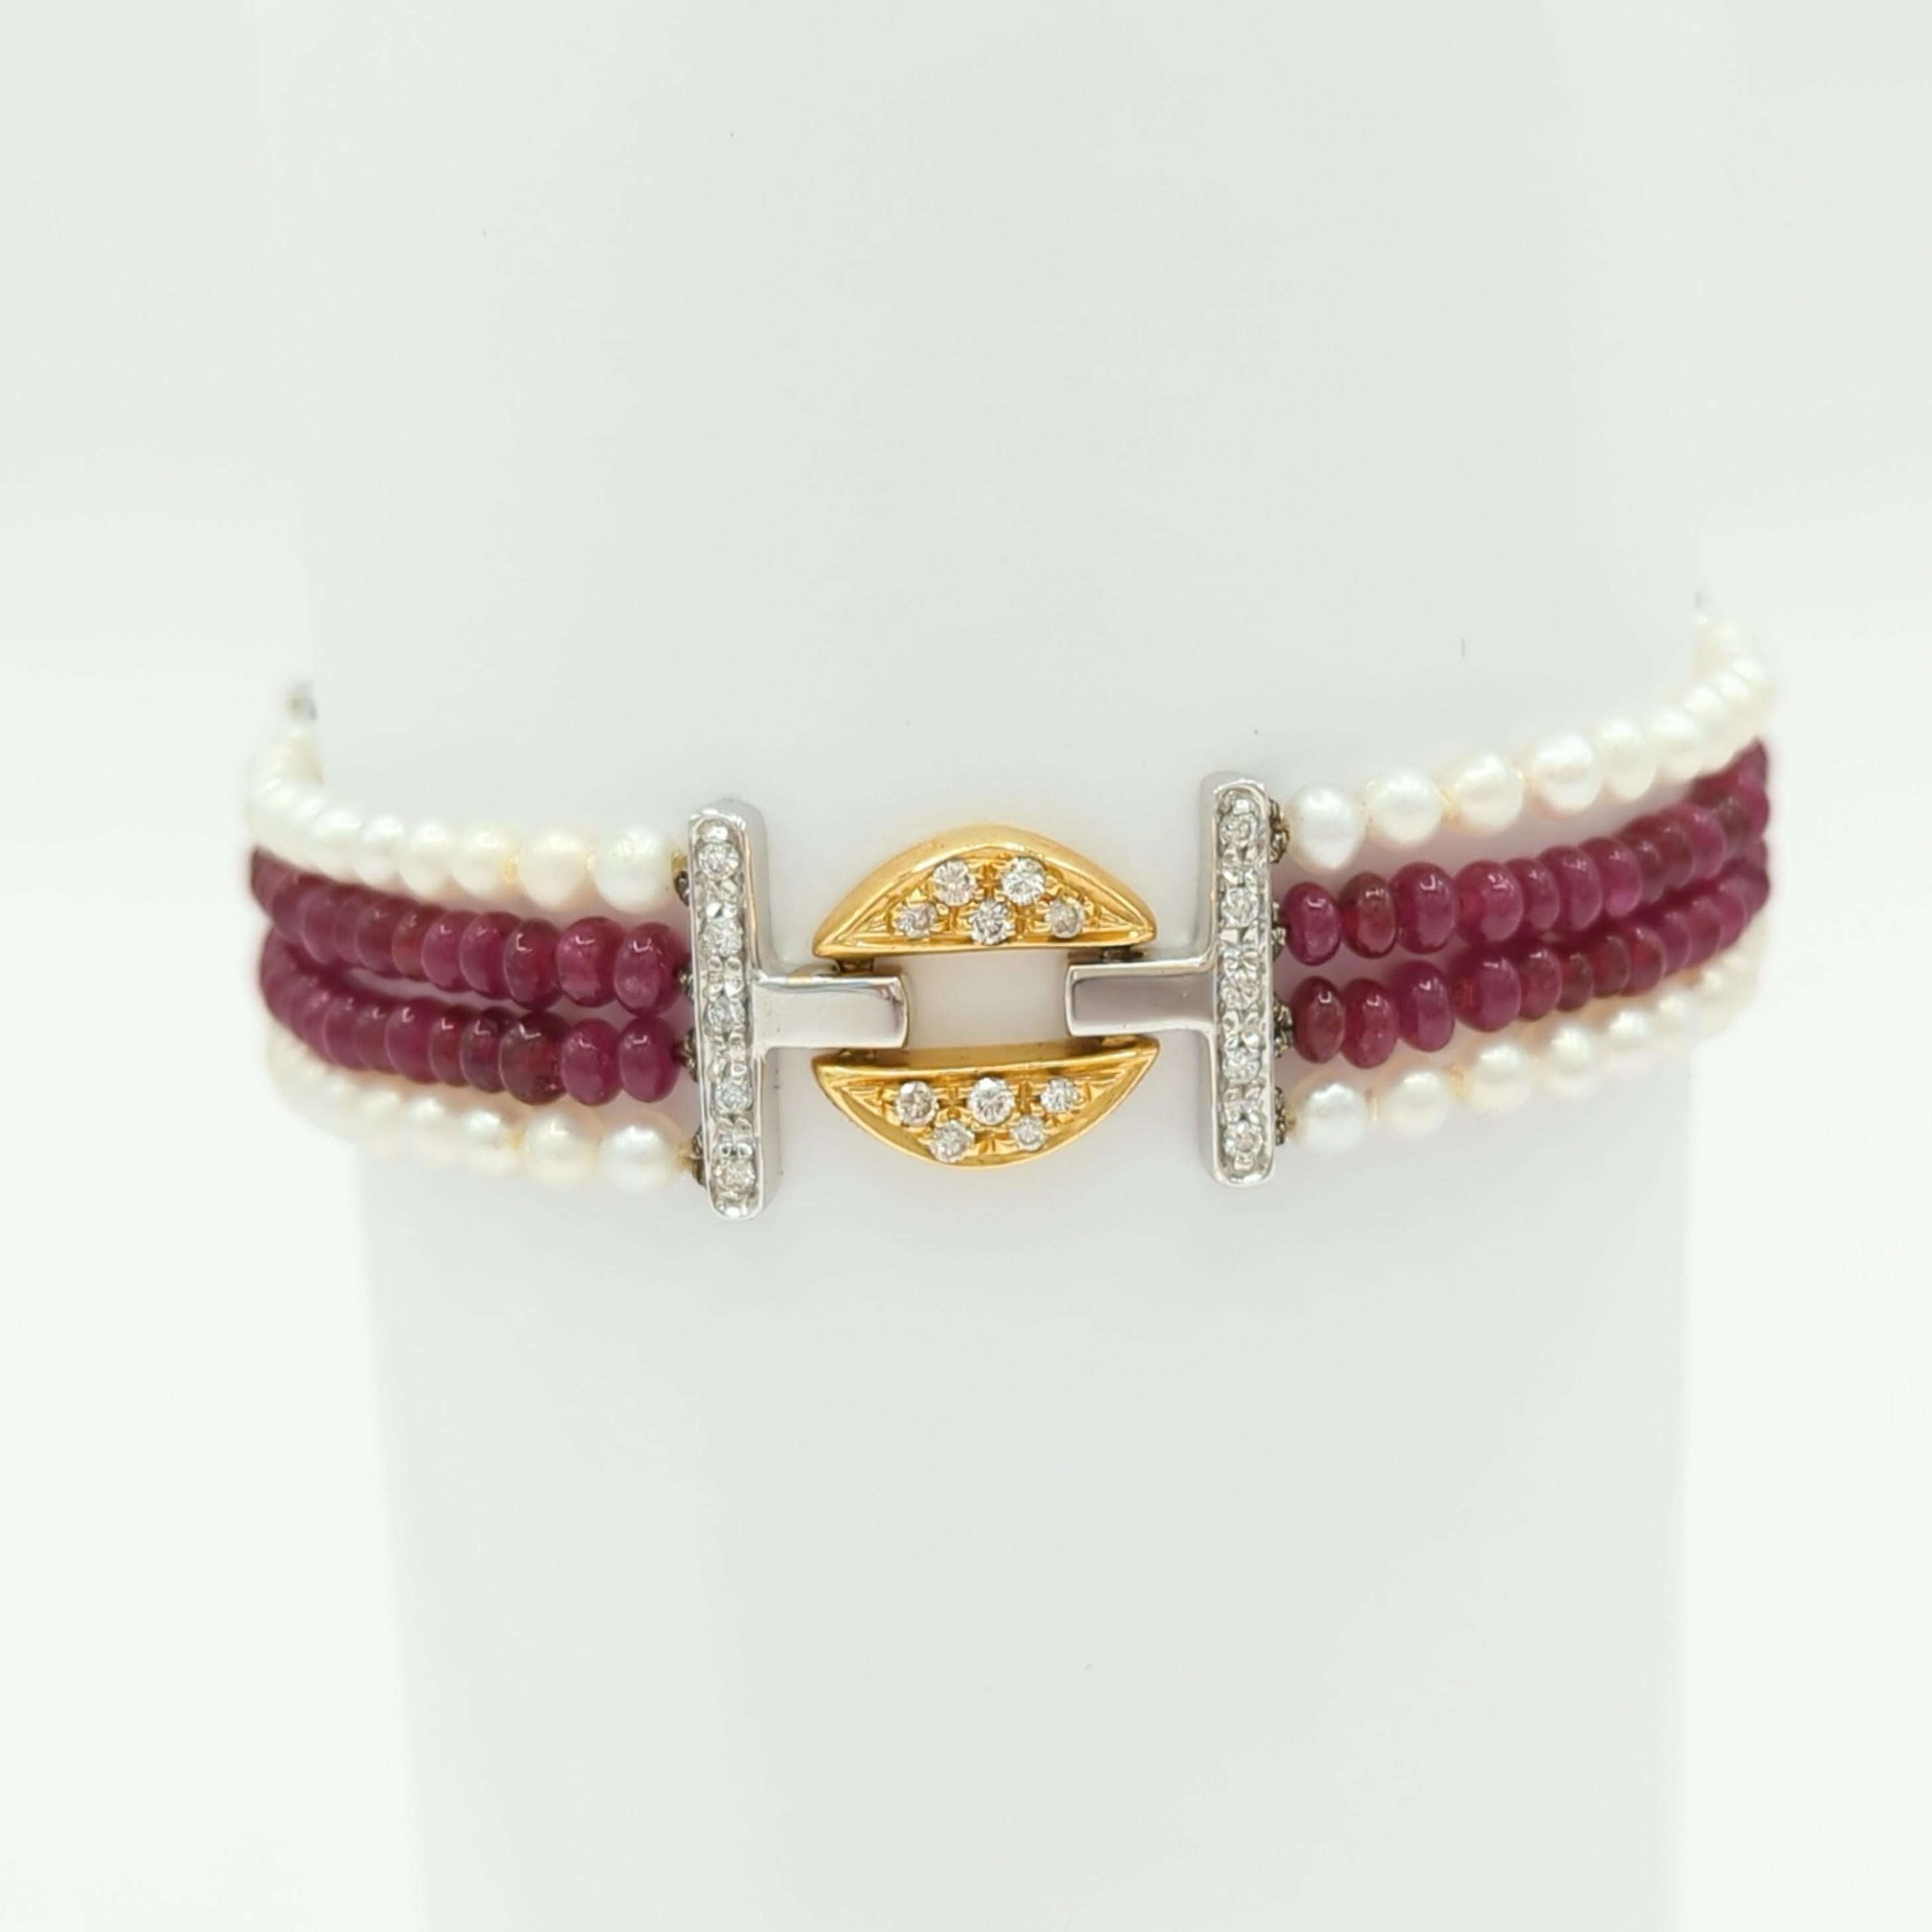 Ruby Bead, White Pearl, and White Diamond Bracelet in 18K 2 Tone Gold For Sale 3